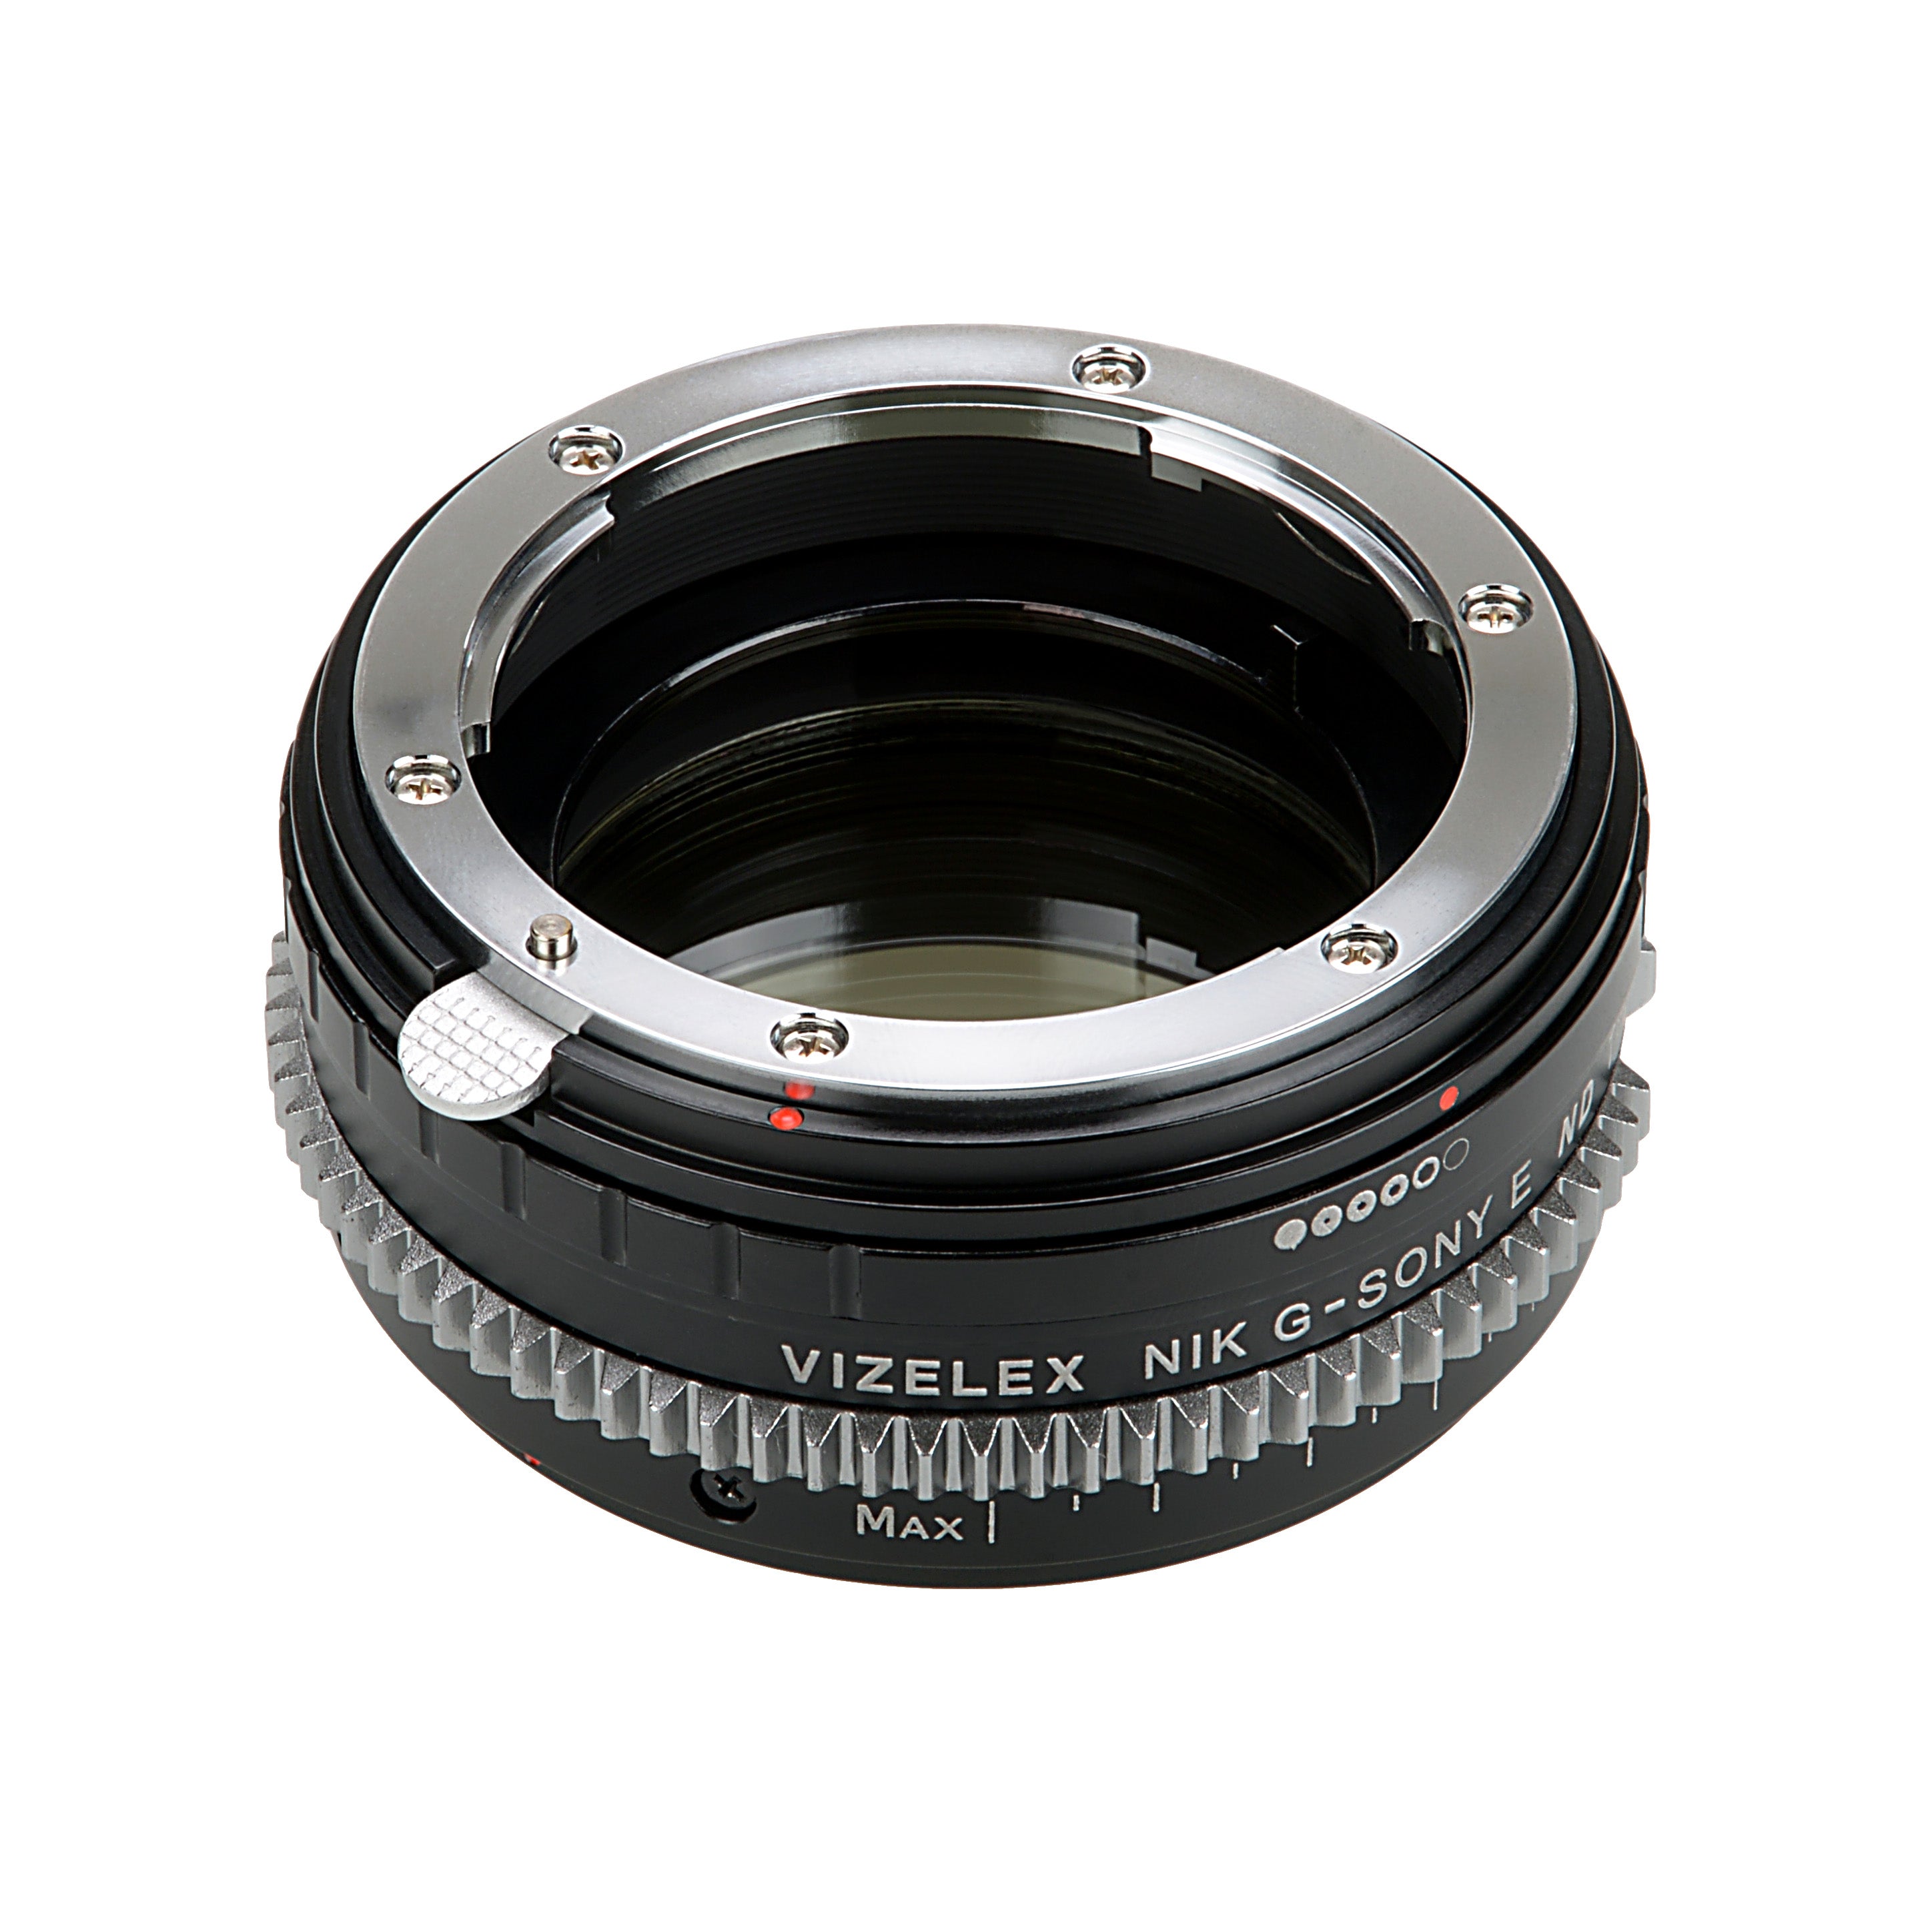 Vizelex Cine ND Throttle Lens Mount Adapter - Nikon Nikkor F Mount G-Type D/SLR Lens to Sony Alpha E-Mount Mirrorless Camera Body with Built-In Variable ND Filter (2 to 8 Stops)